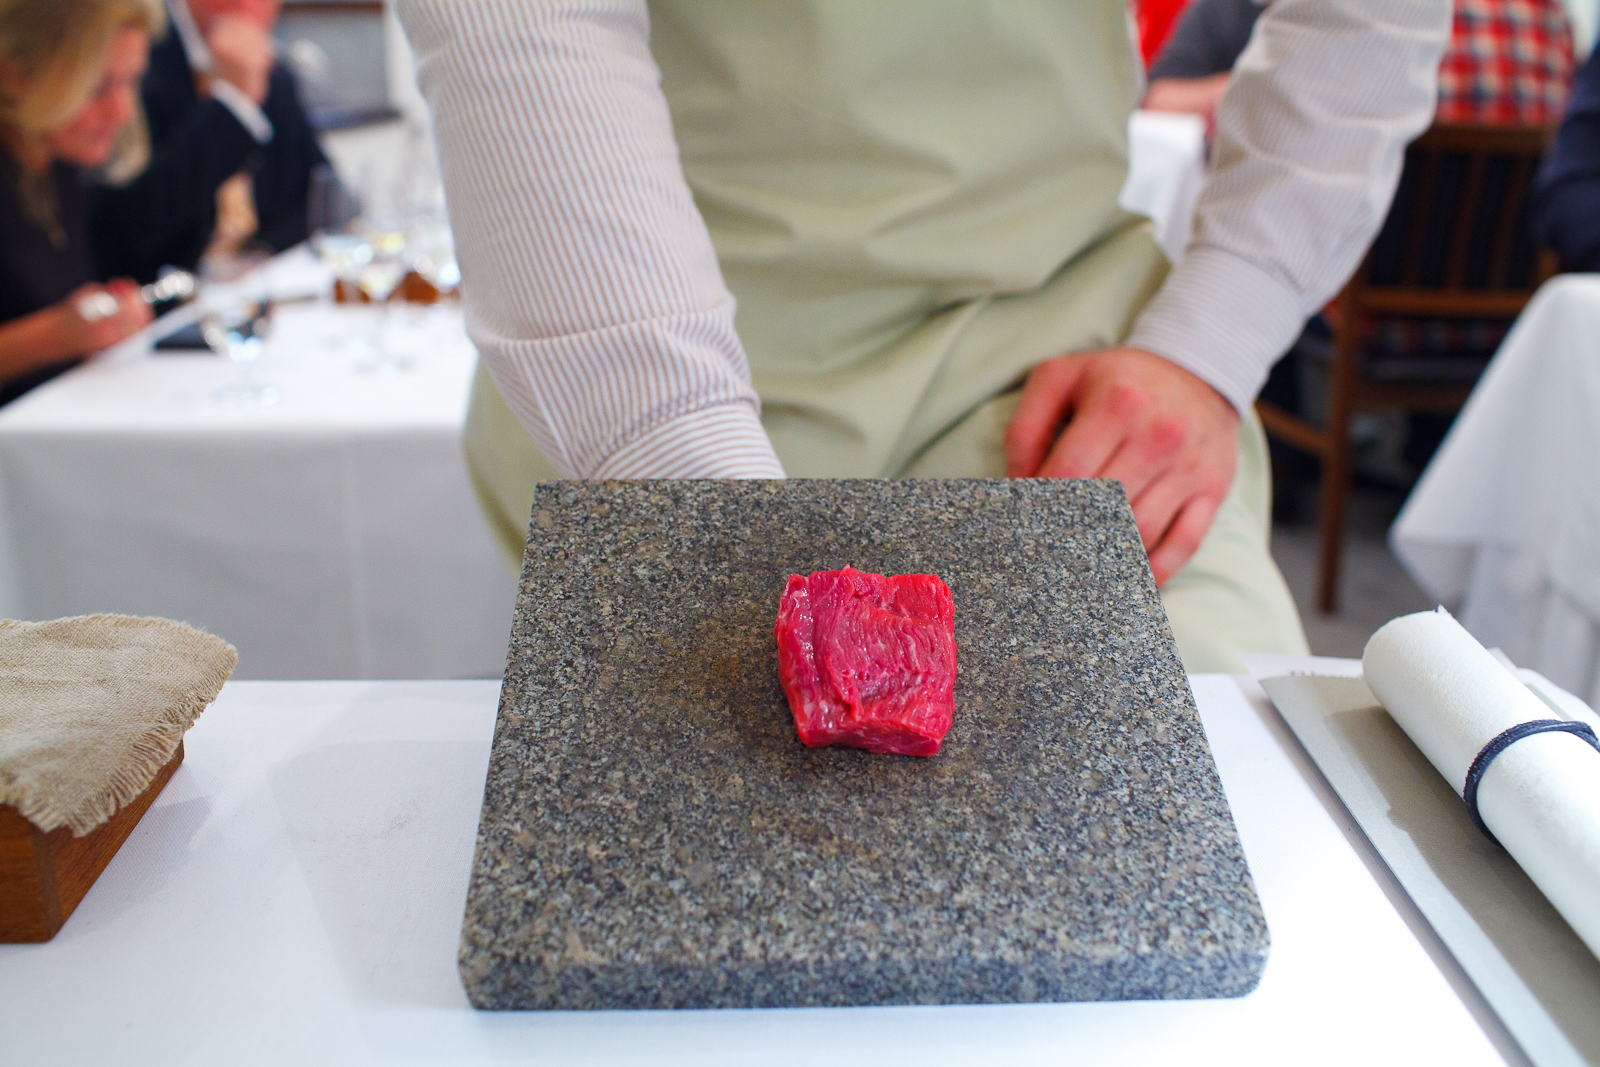 6th Course: Presentation of beef from a Swedish milk cow in three servings.